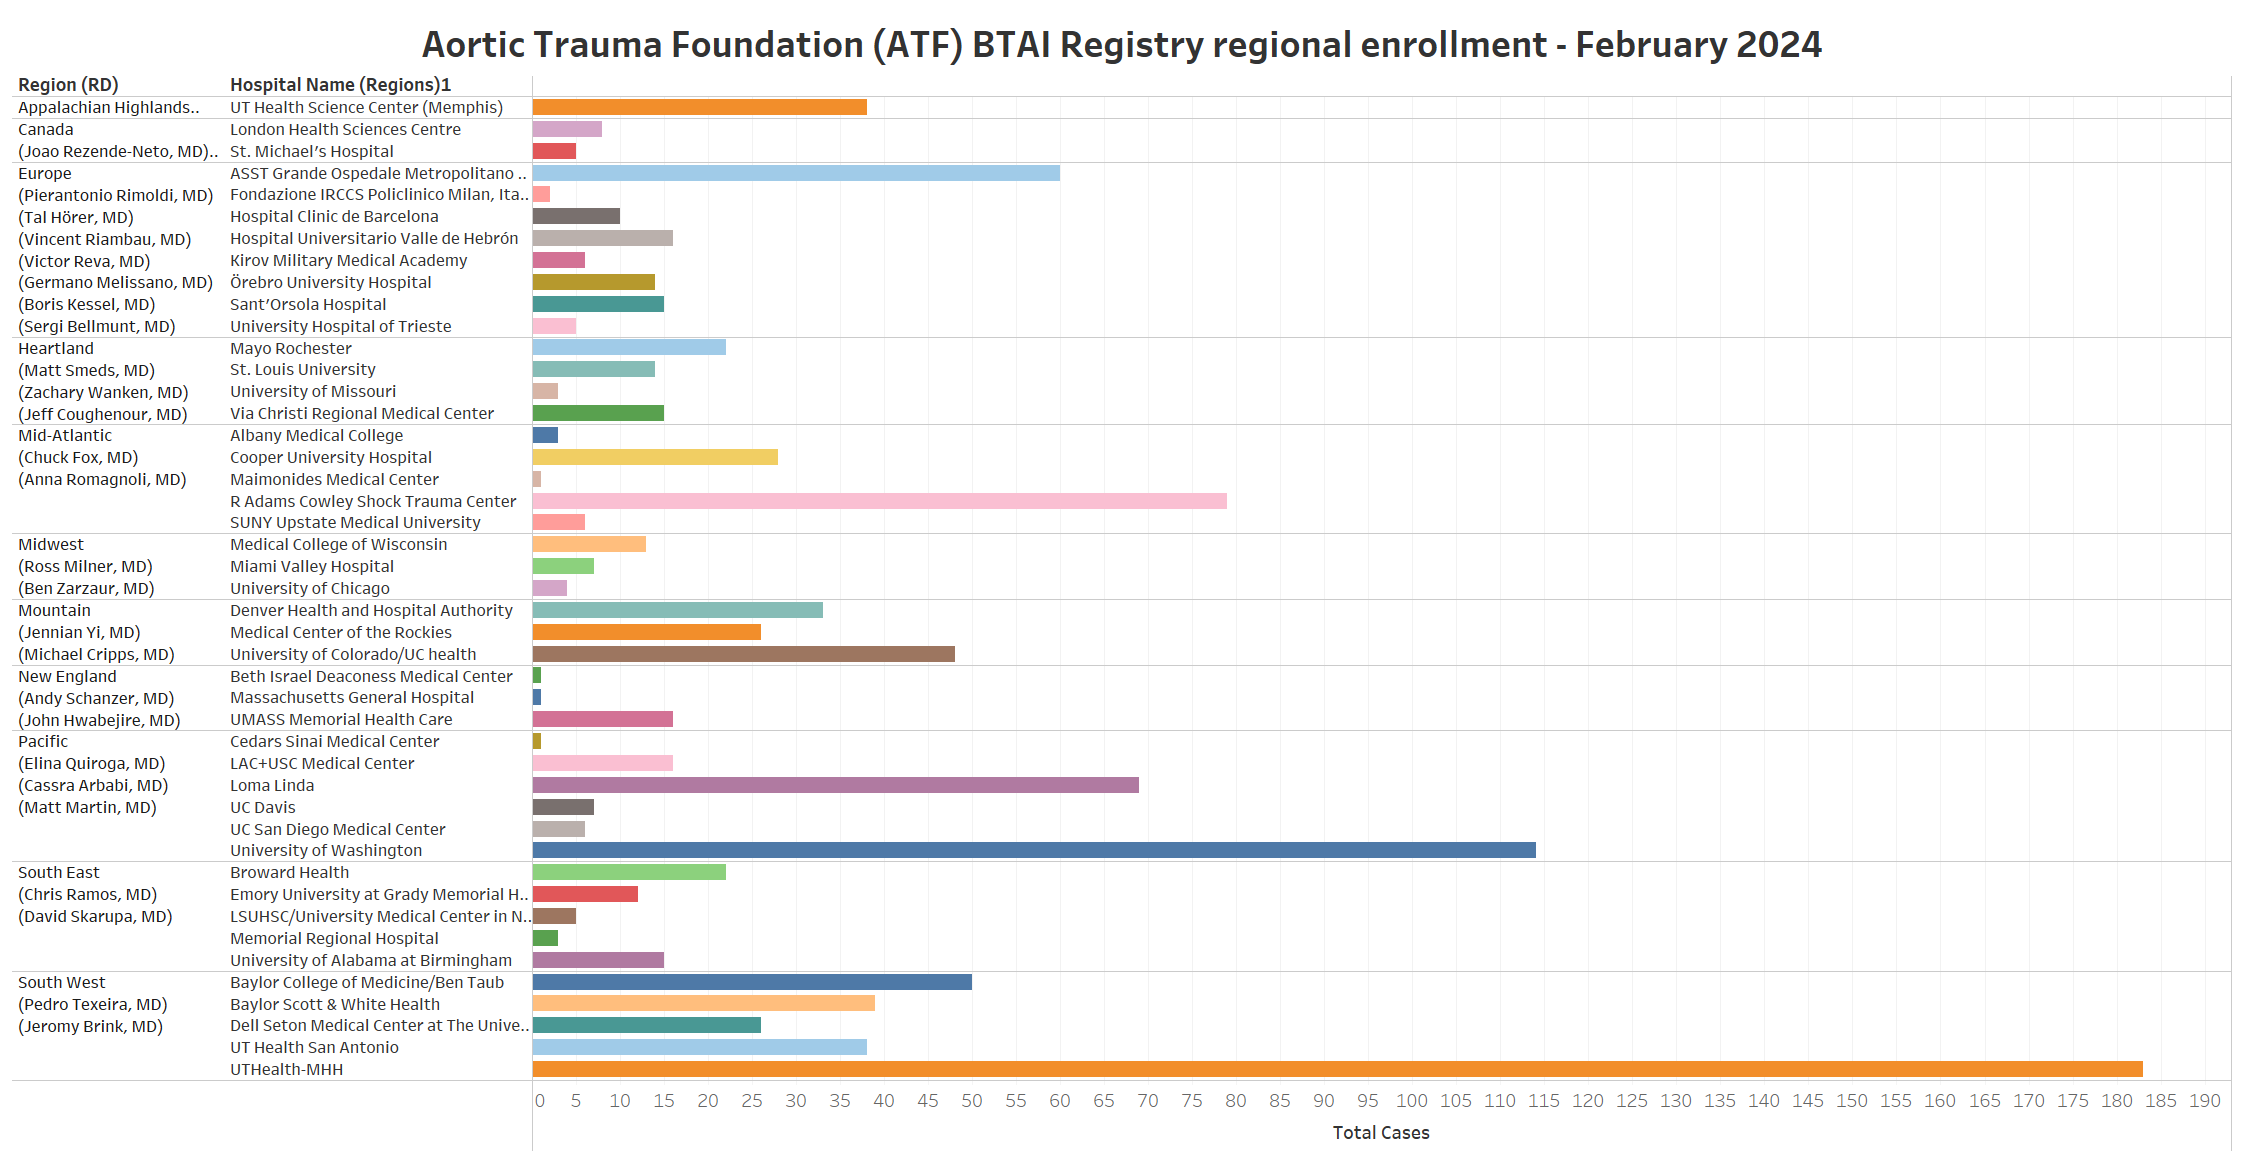 Blunt Thoracic Aortic Injury Registry - February 2024 Update